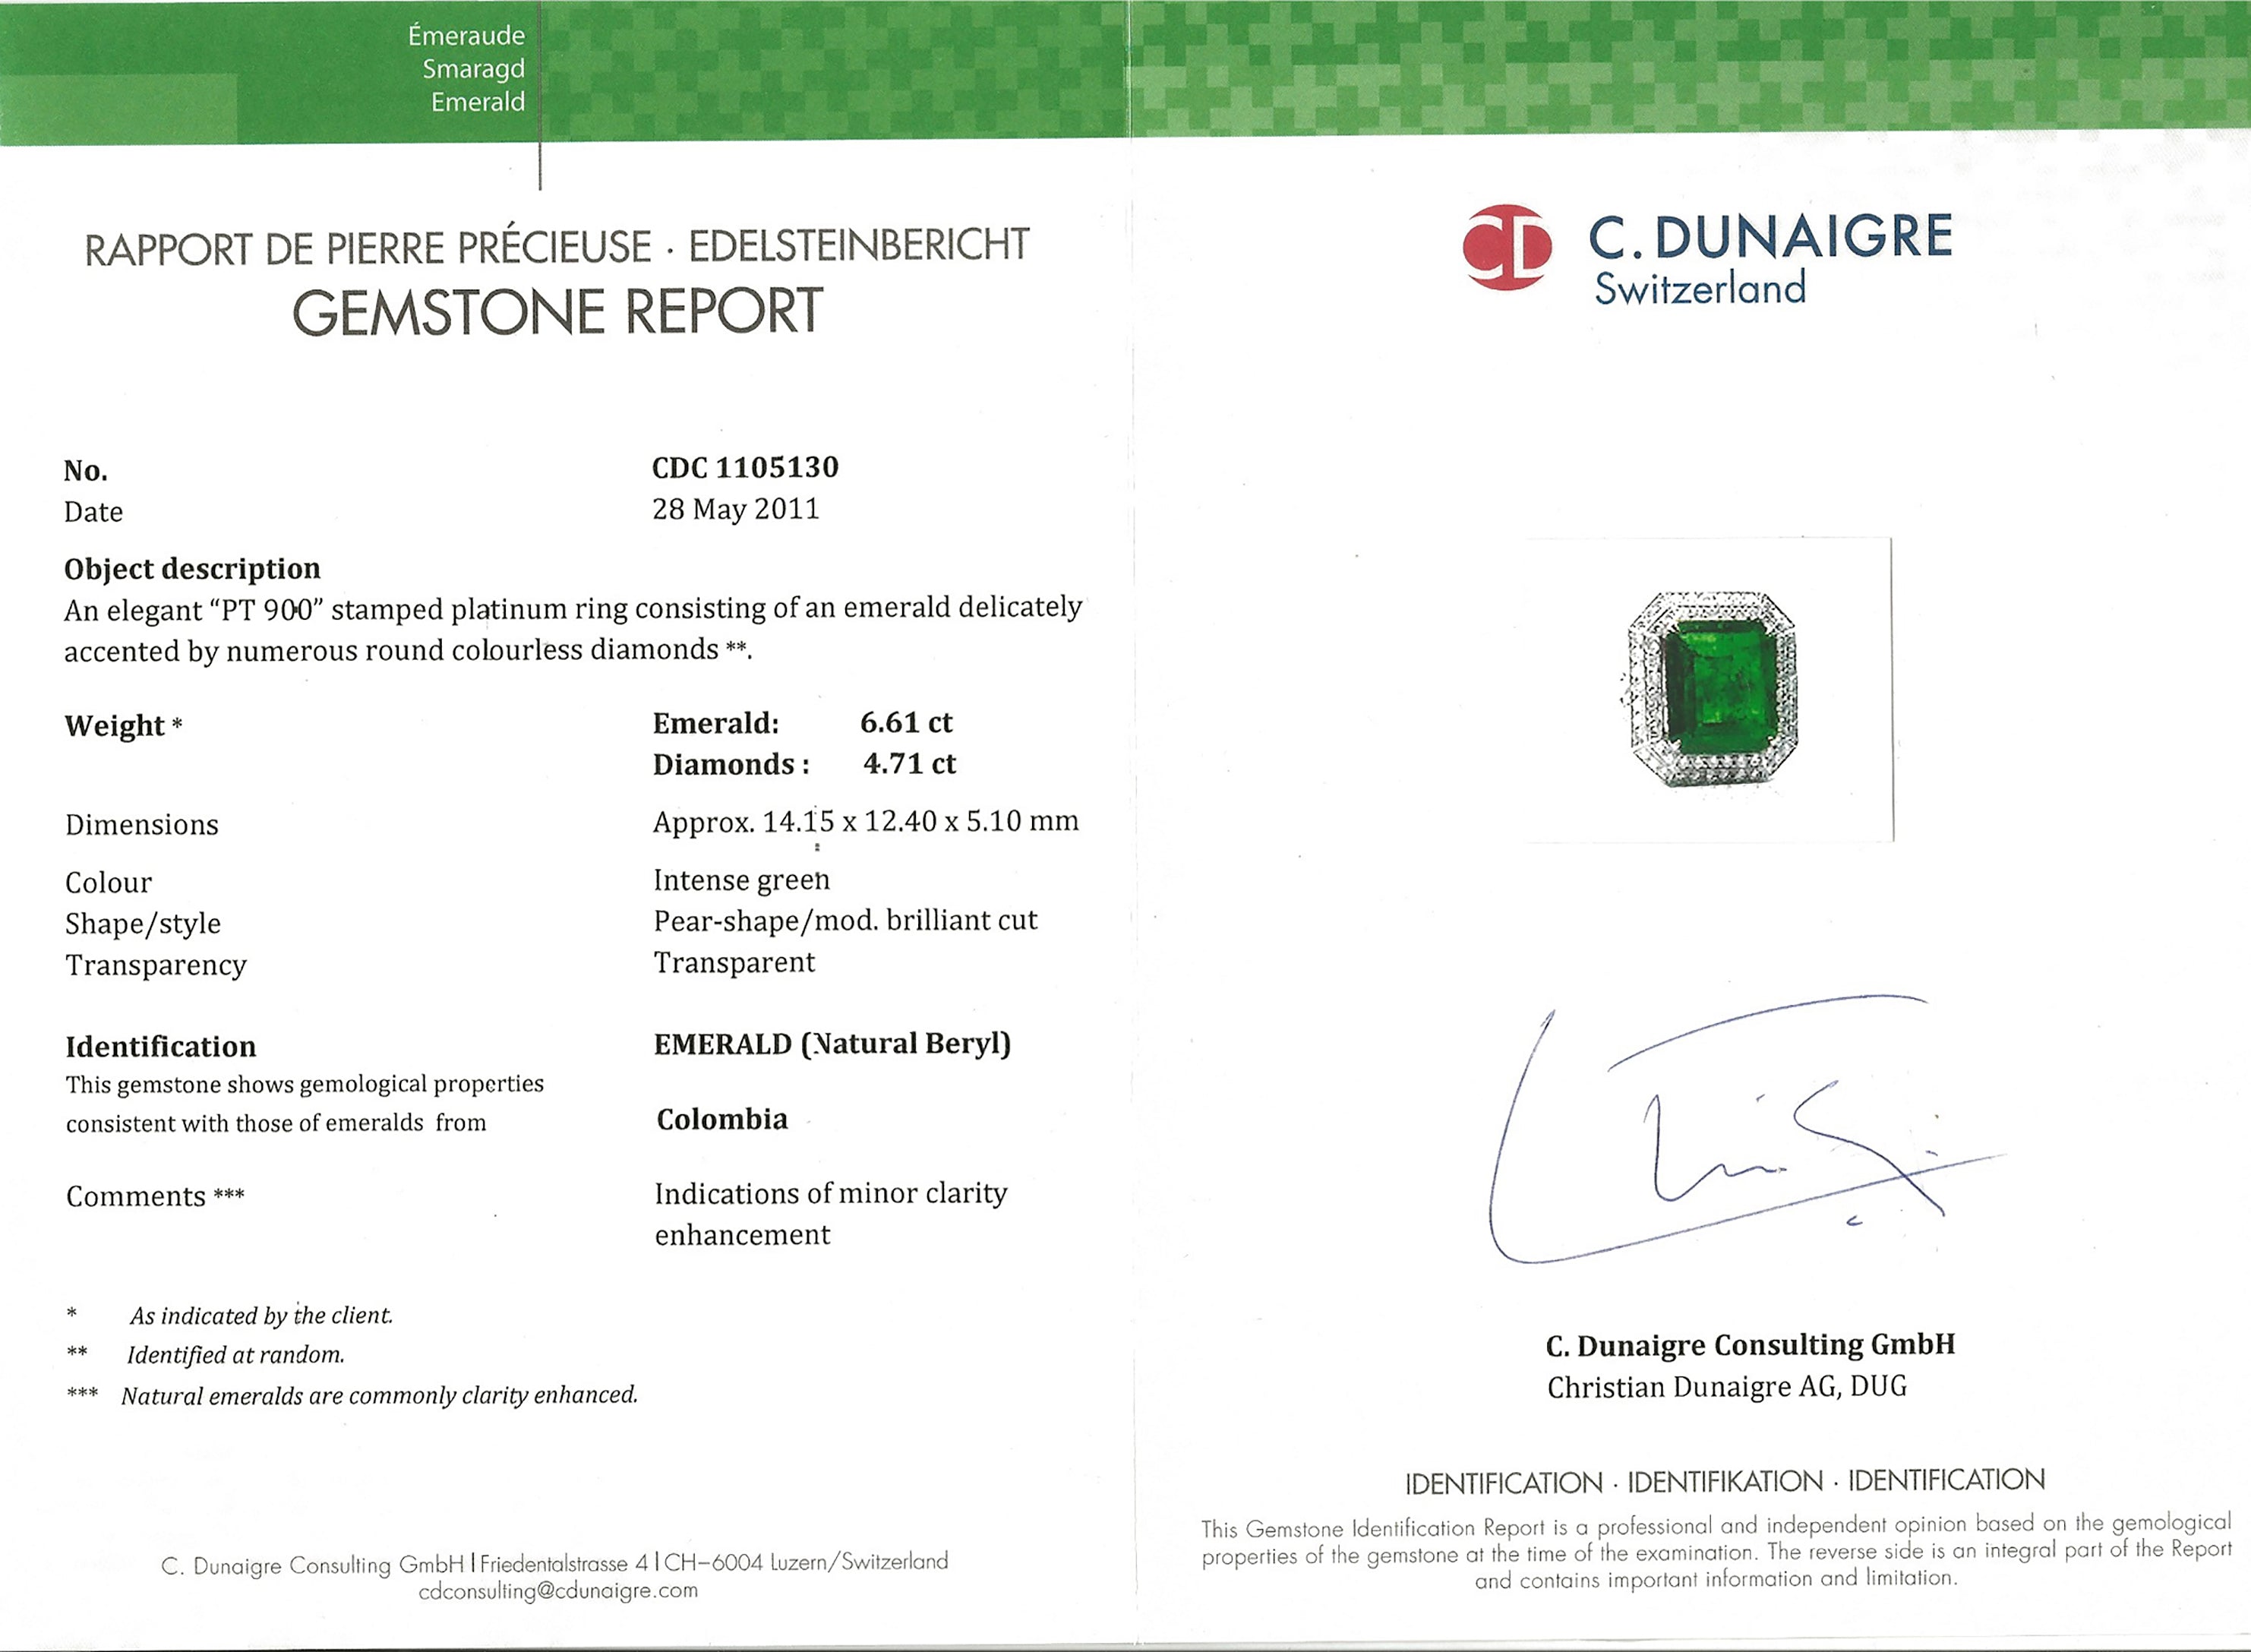 6.81 Carat Colombian Emerald Ring